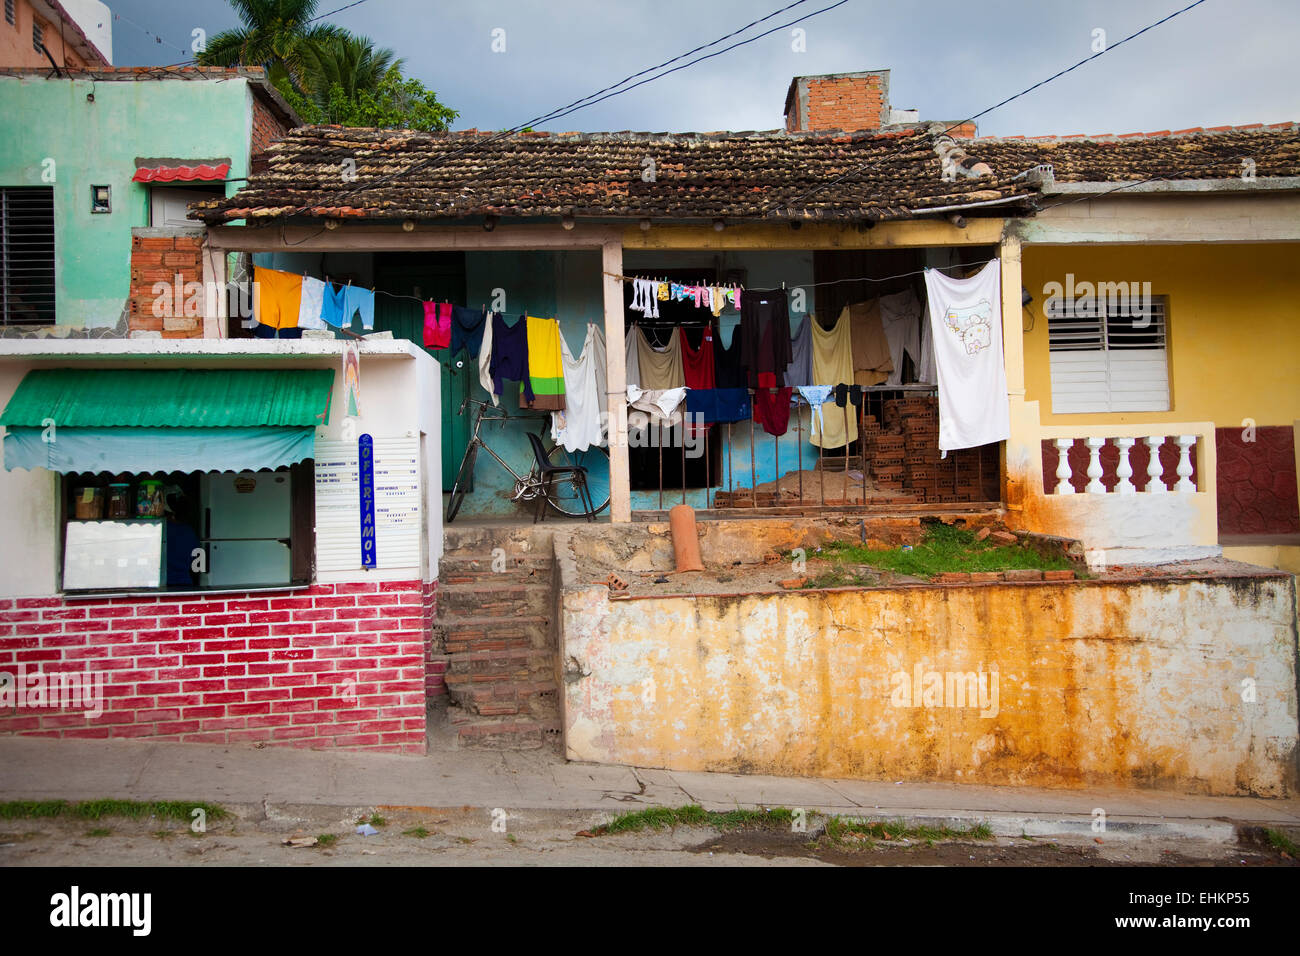 Crowded housing in a poor area of Trinidad, Cuba Stock Photo